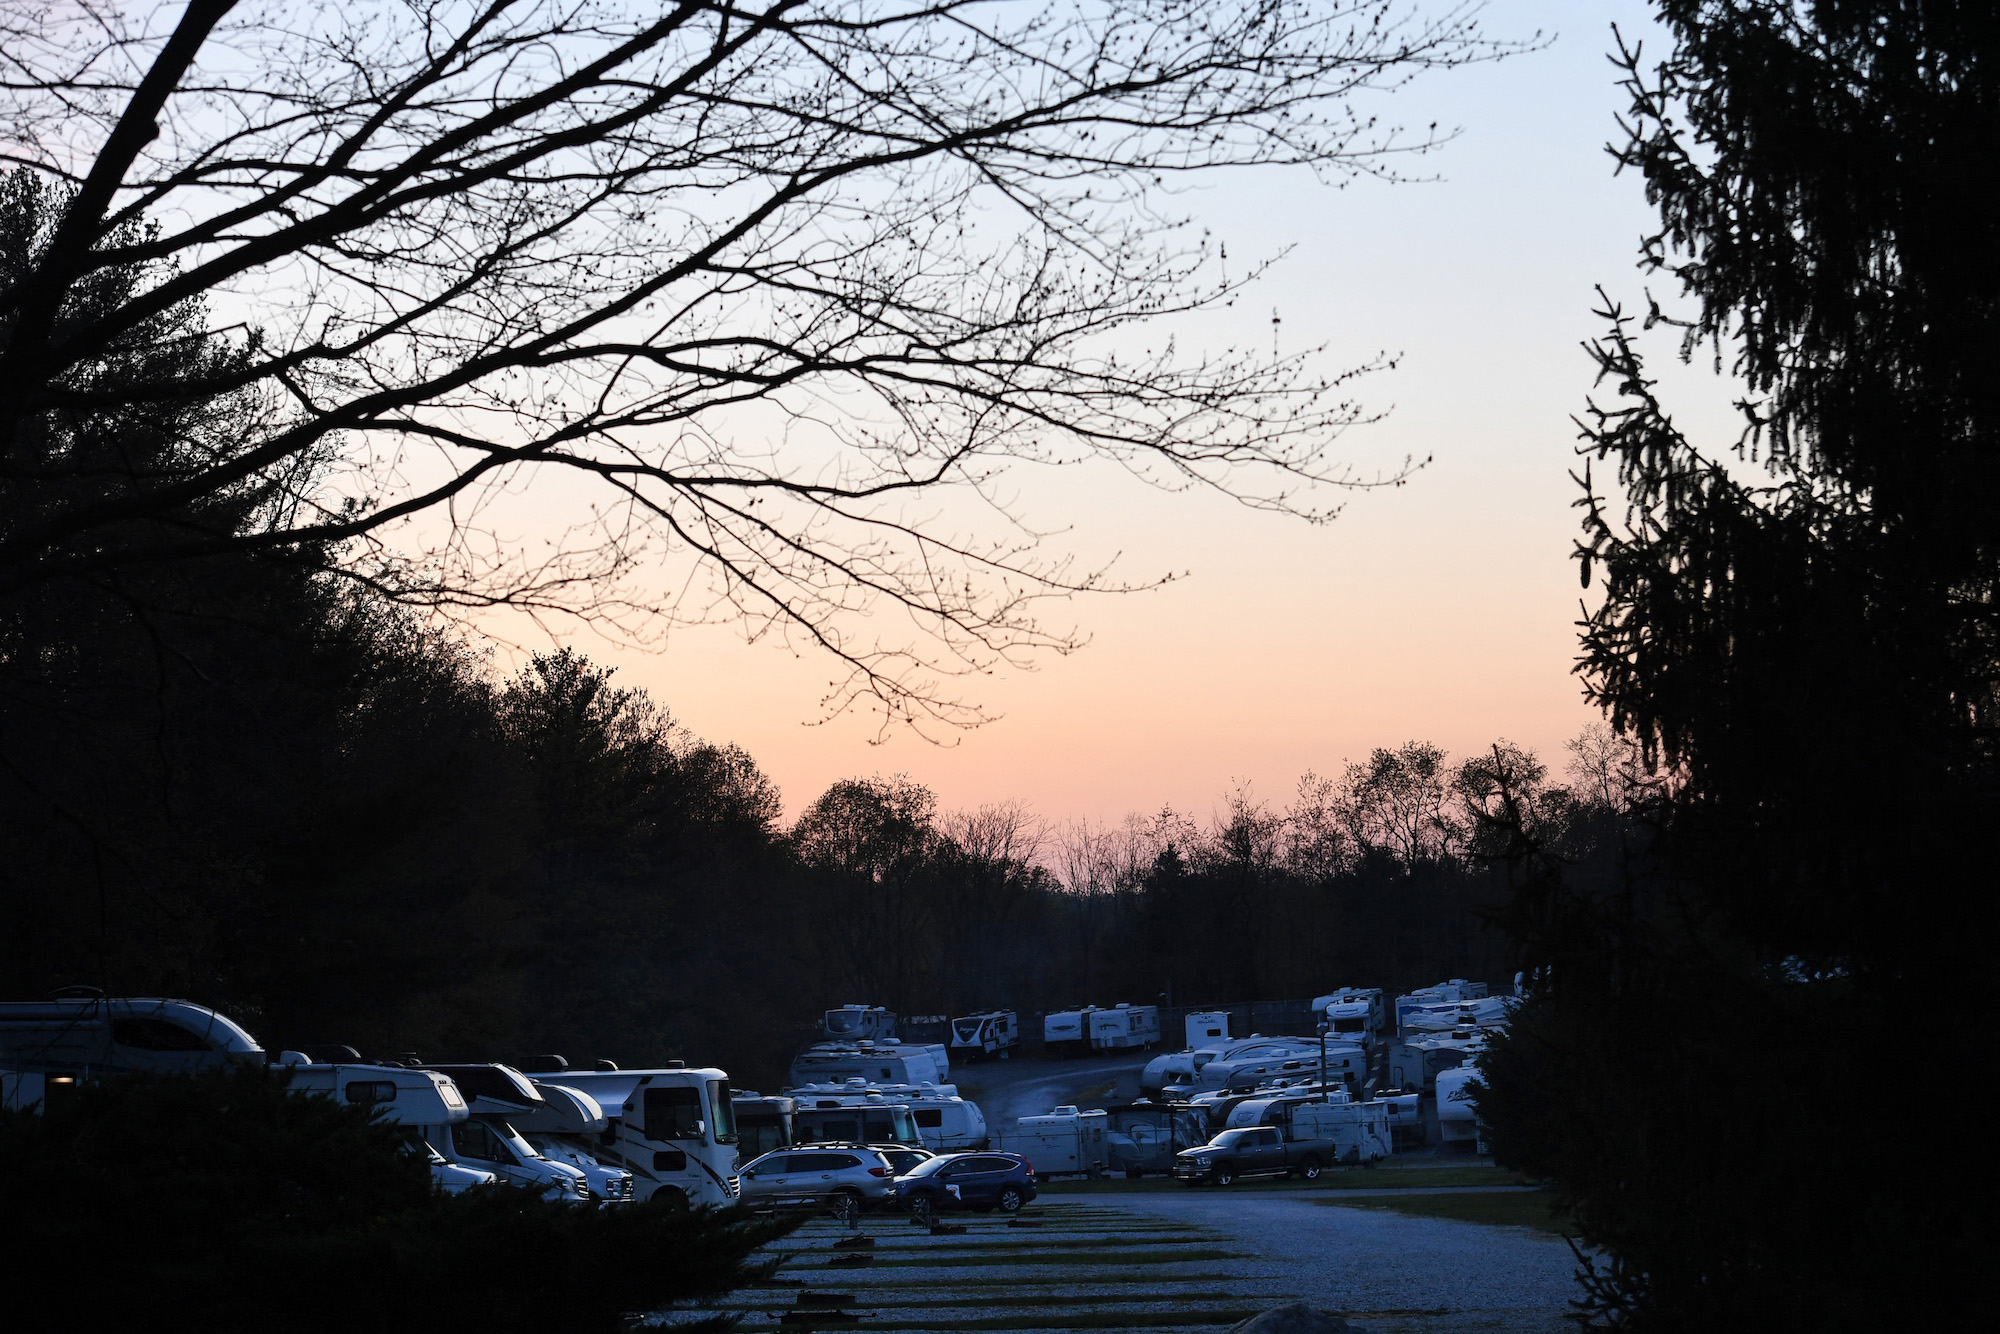 Trailers, motorhomes, and camper vans parked at the Ramblin Pines Campsite outside of Baltimore in Woodbine, Maryland on April 23, 2021